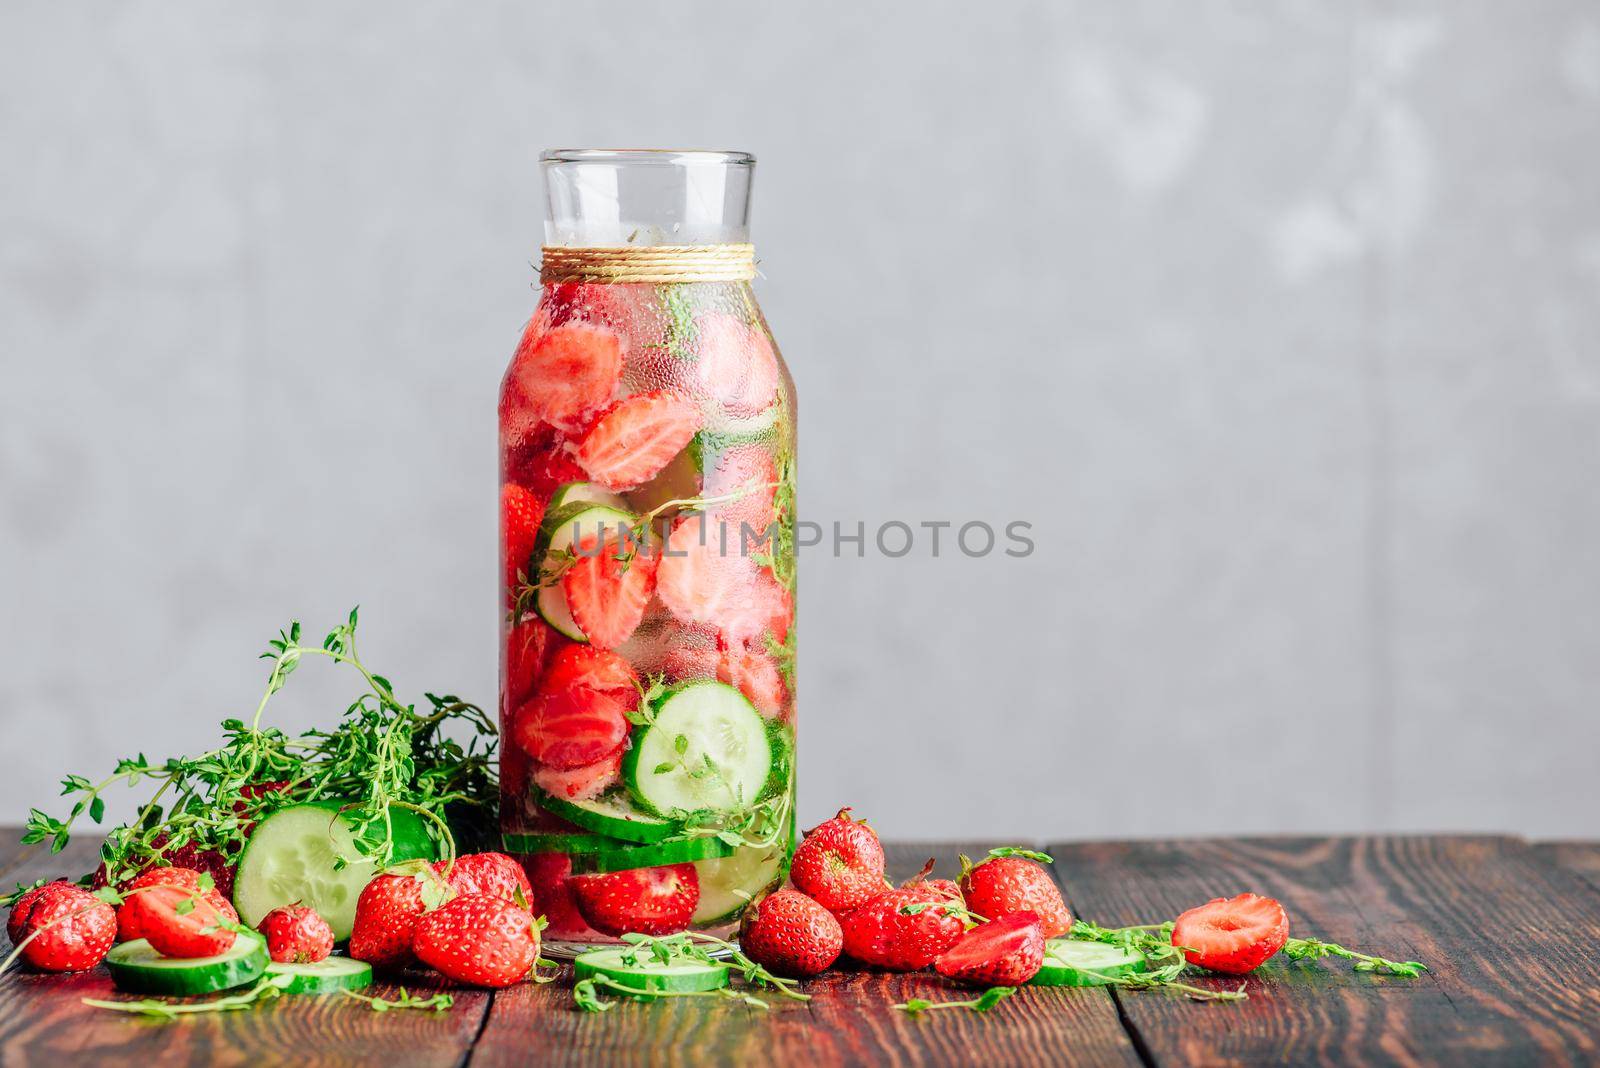 Infused Water with Strawberry, Cucumber and Thyme. by Seva_blsv